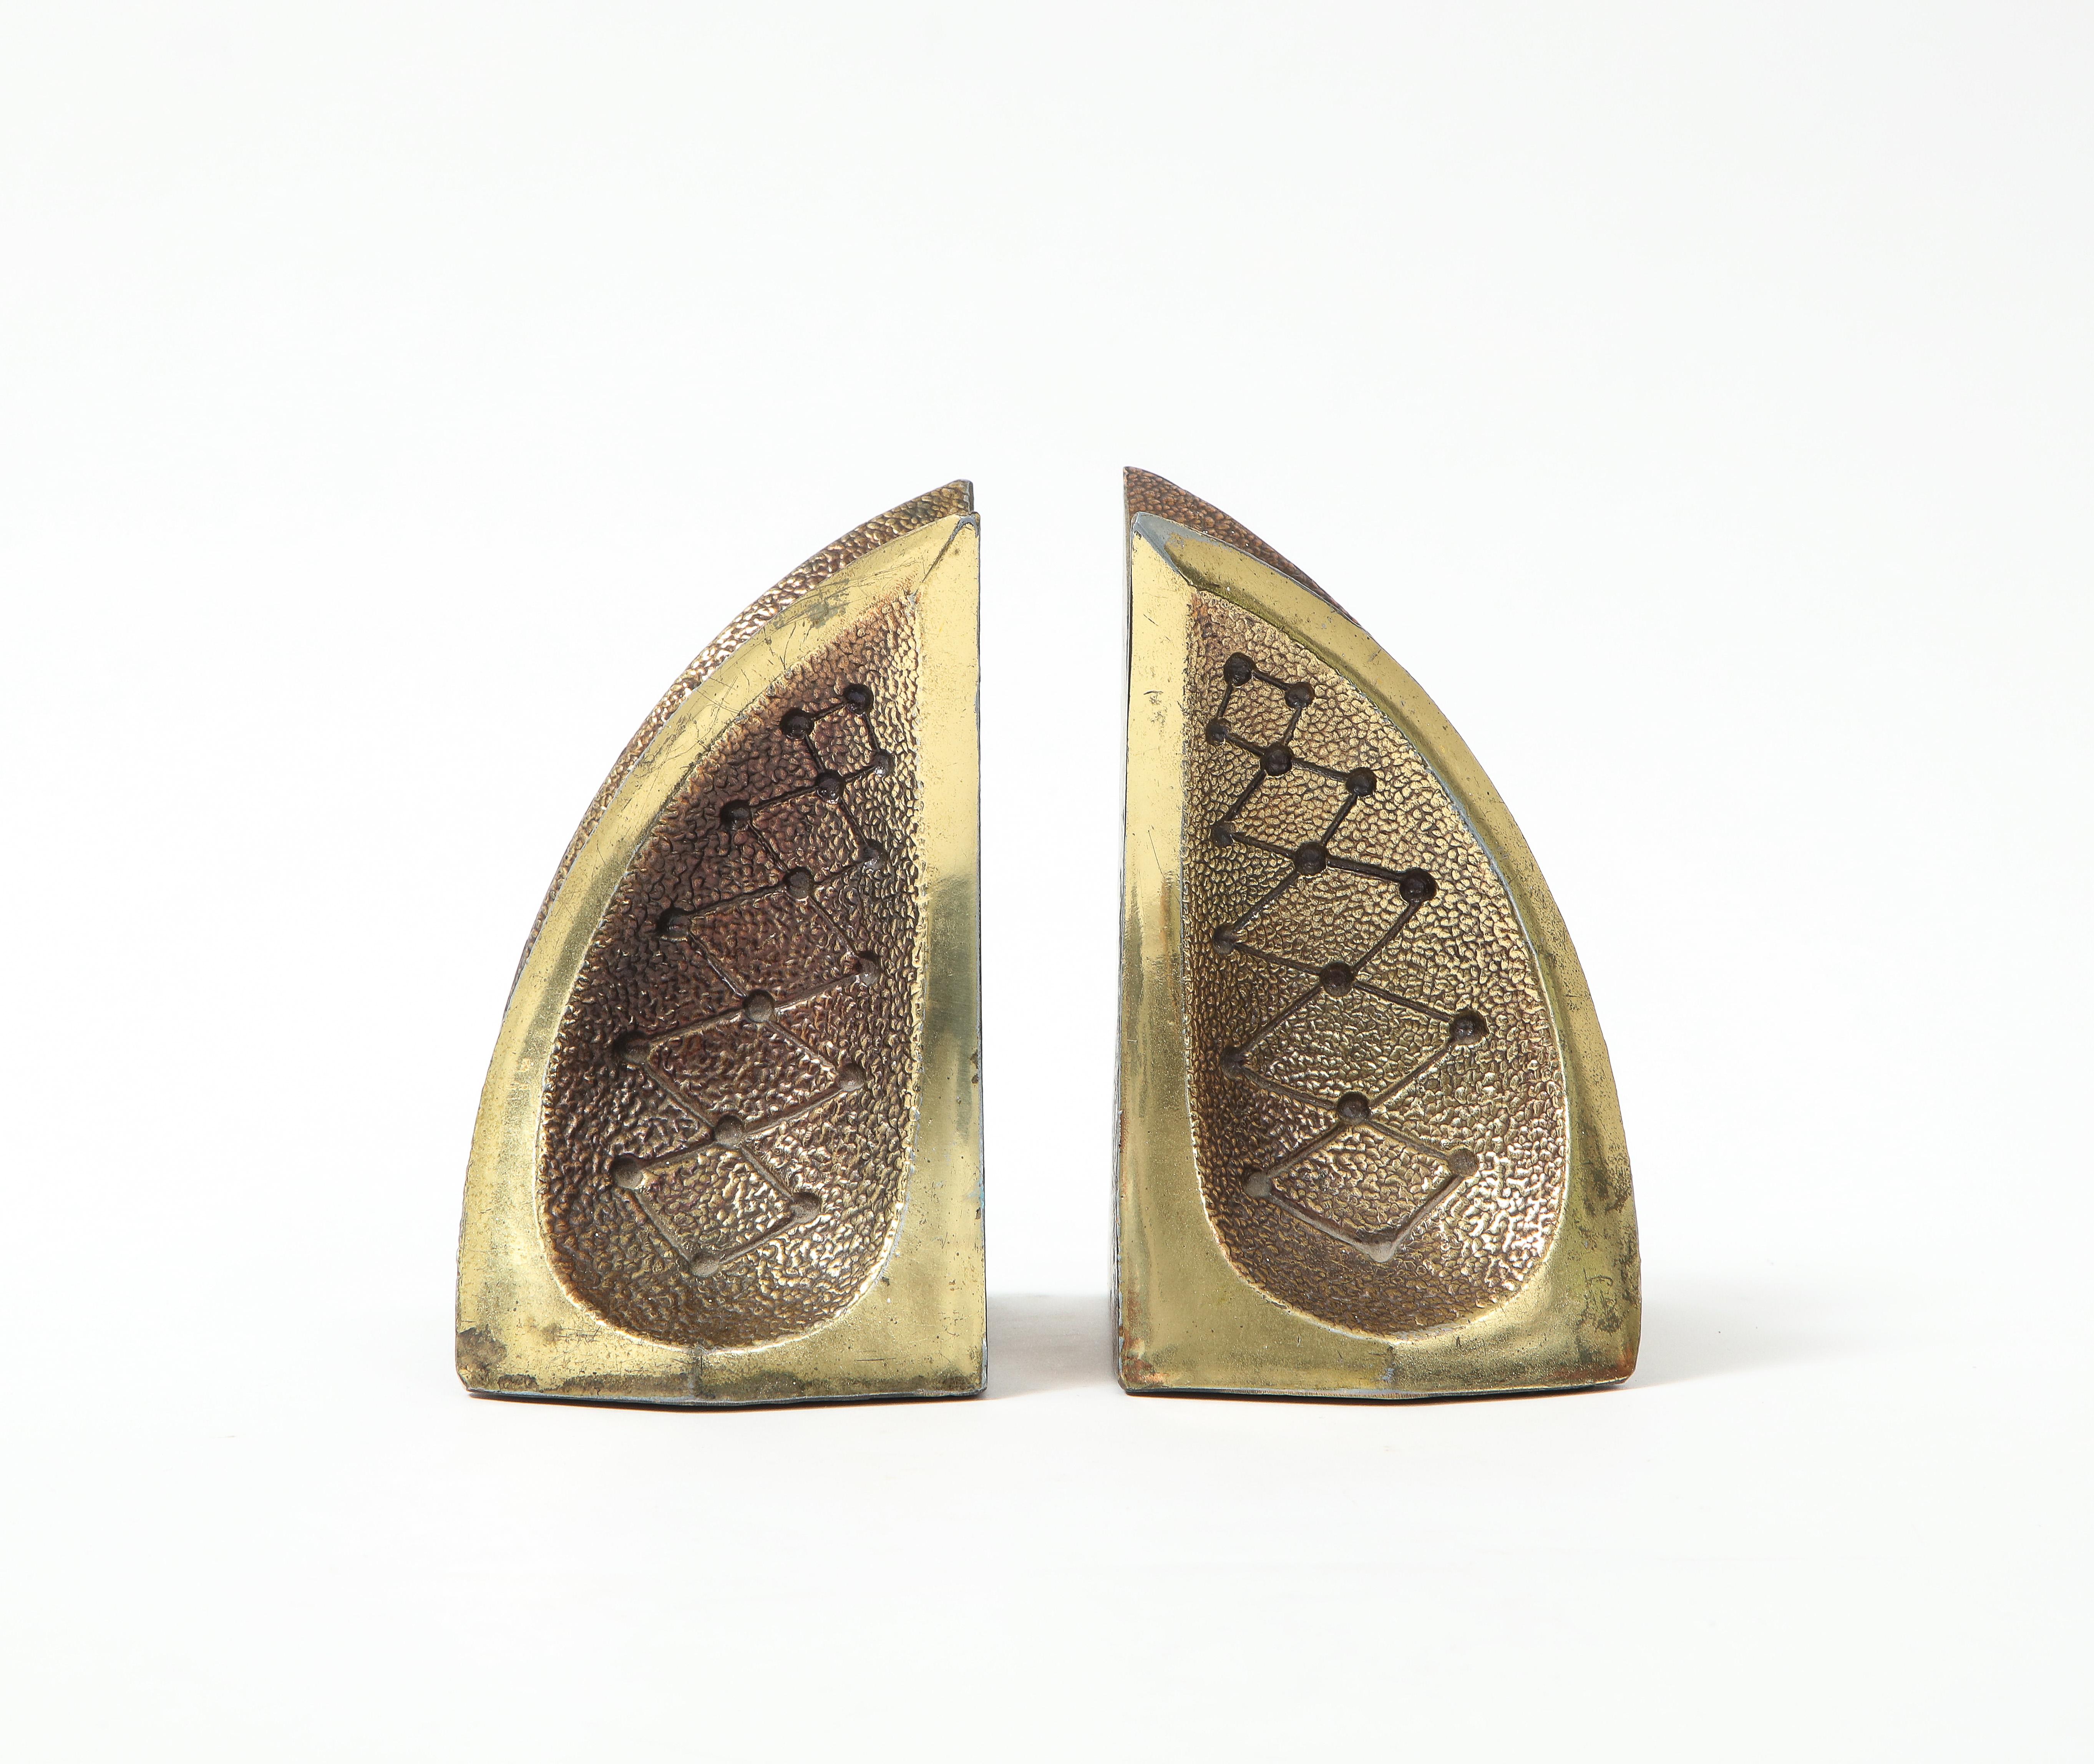 Set of atomic sculptural brass finished bookends by Ben Seibel, c60s.